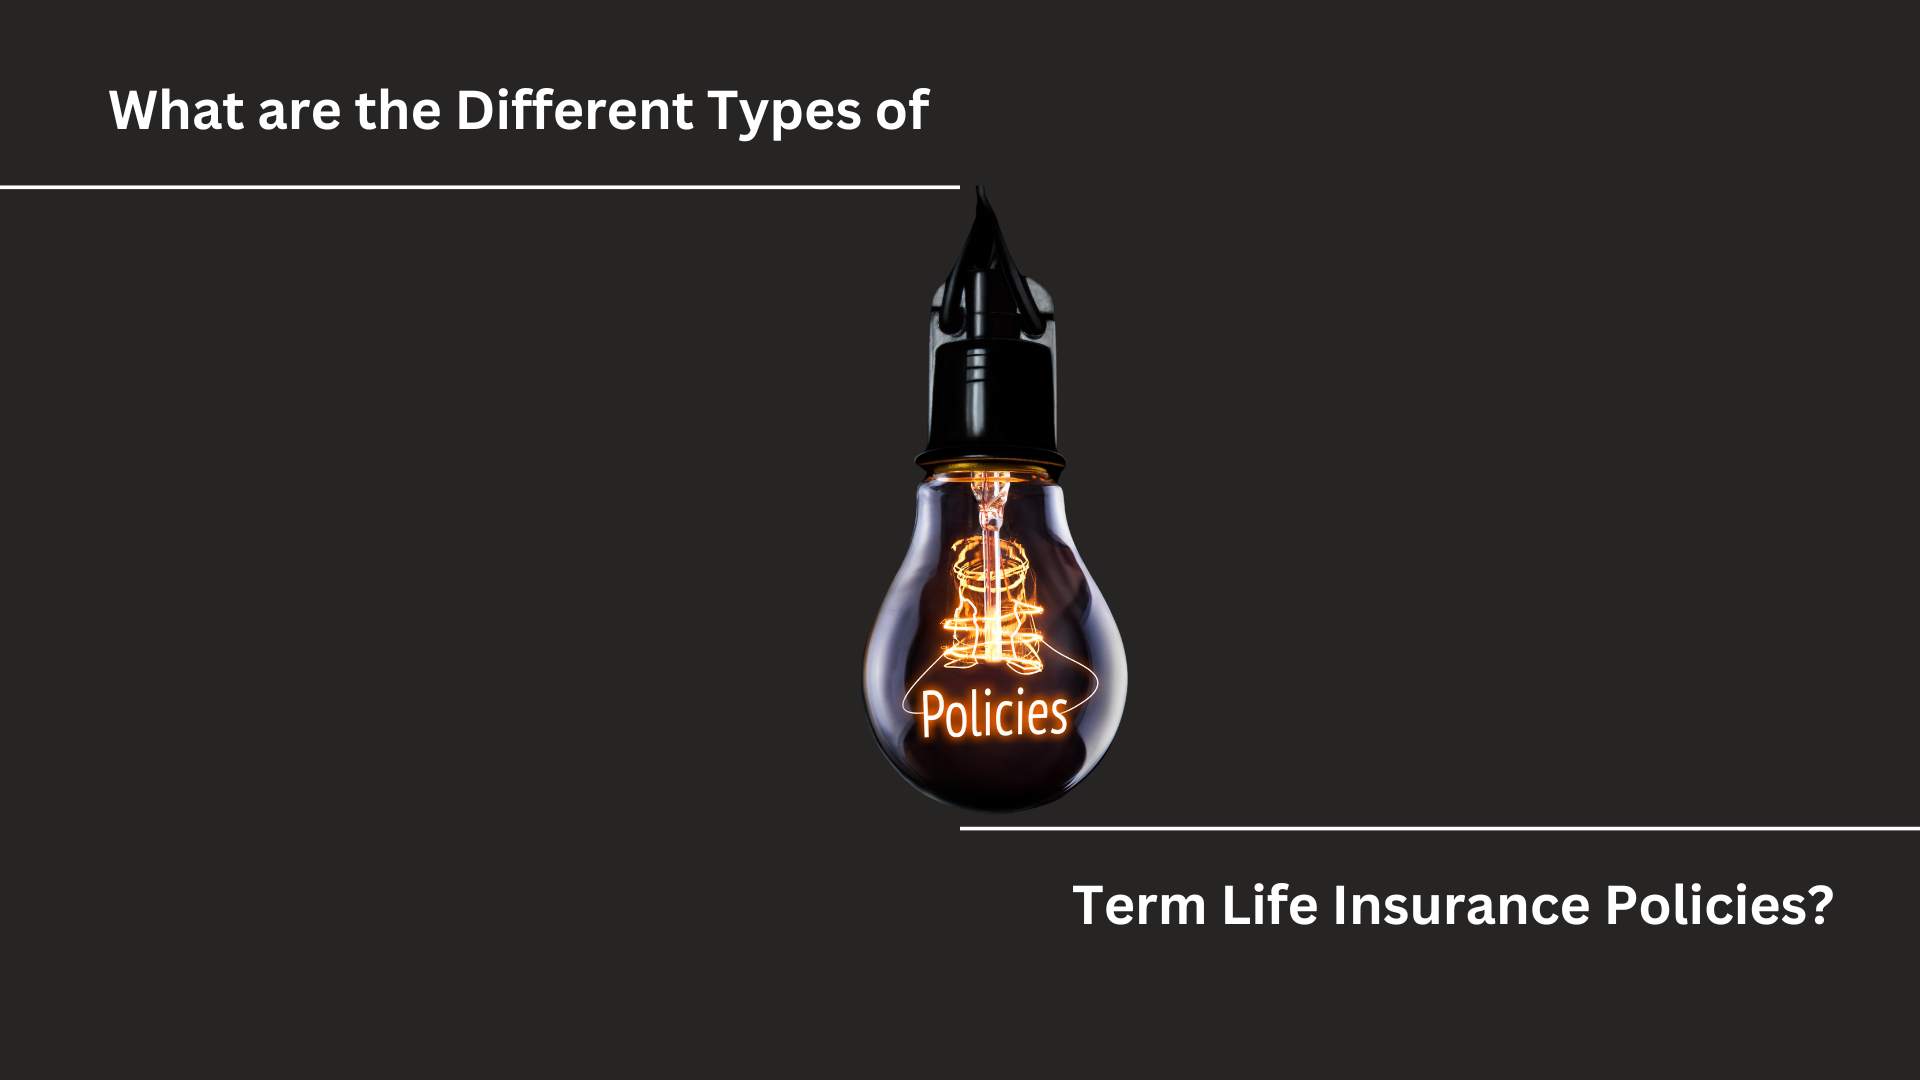 Term Insurance 1 What are the Different Types of Term Life Insurance Policies?